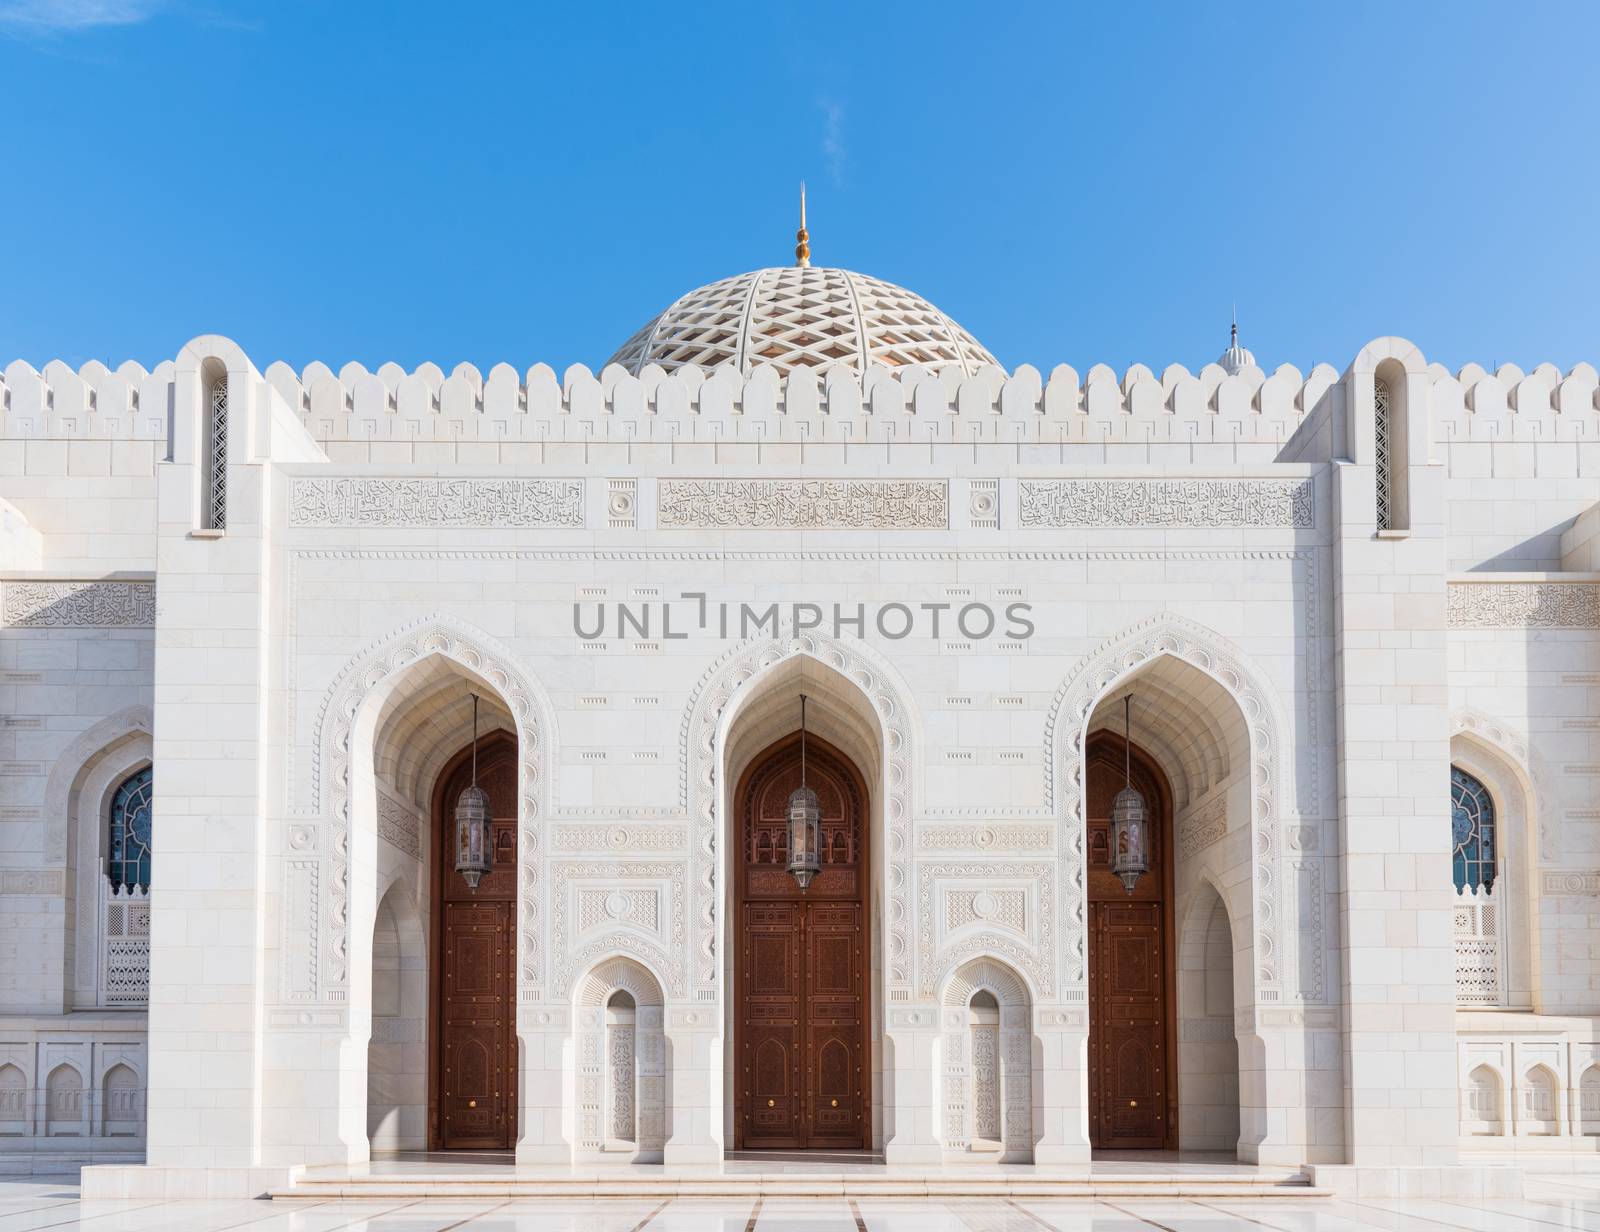 Exterior detail with entrance doors and the dome in the background of the Sultan Qaboos Grand Mosque in Muscat, the main mosque of The Sultanate of Oman.